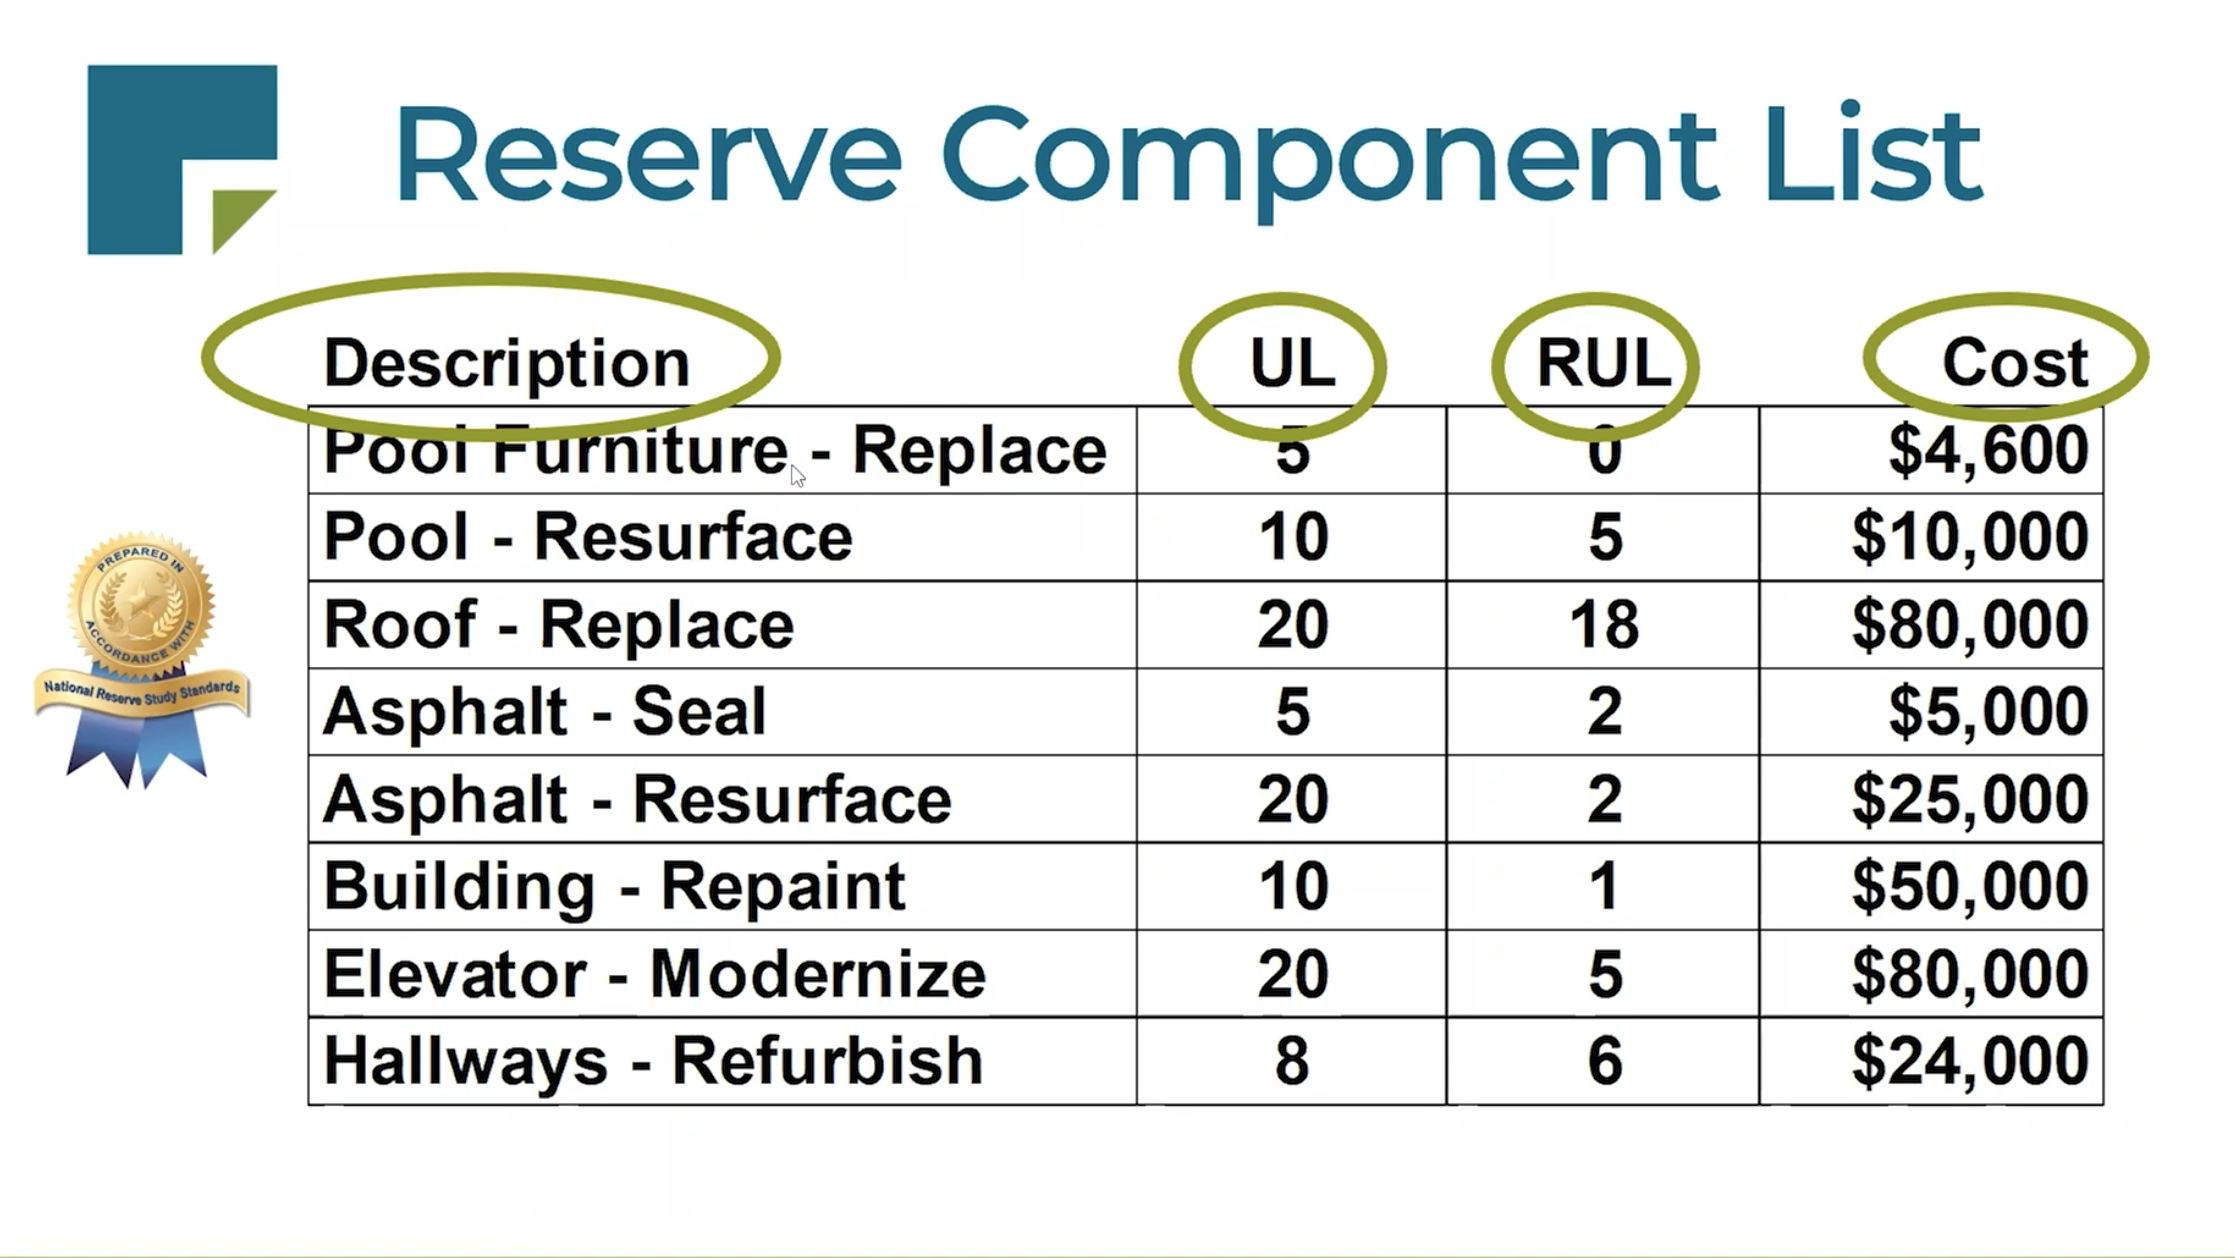 hoa-reserve-componene-list-from-reserve-study-assets